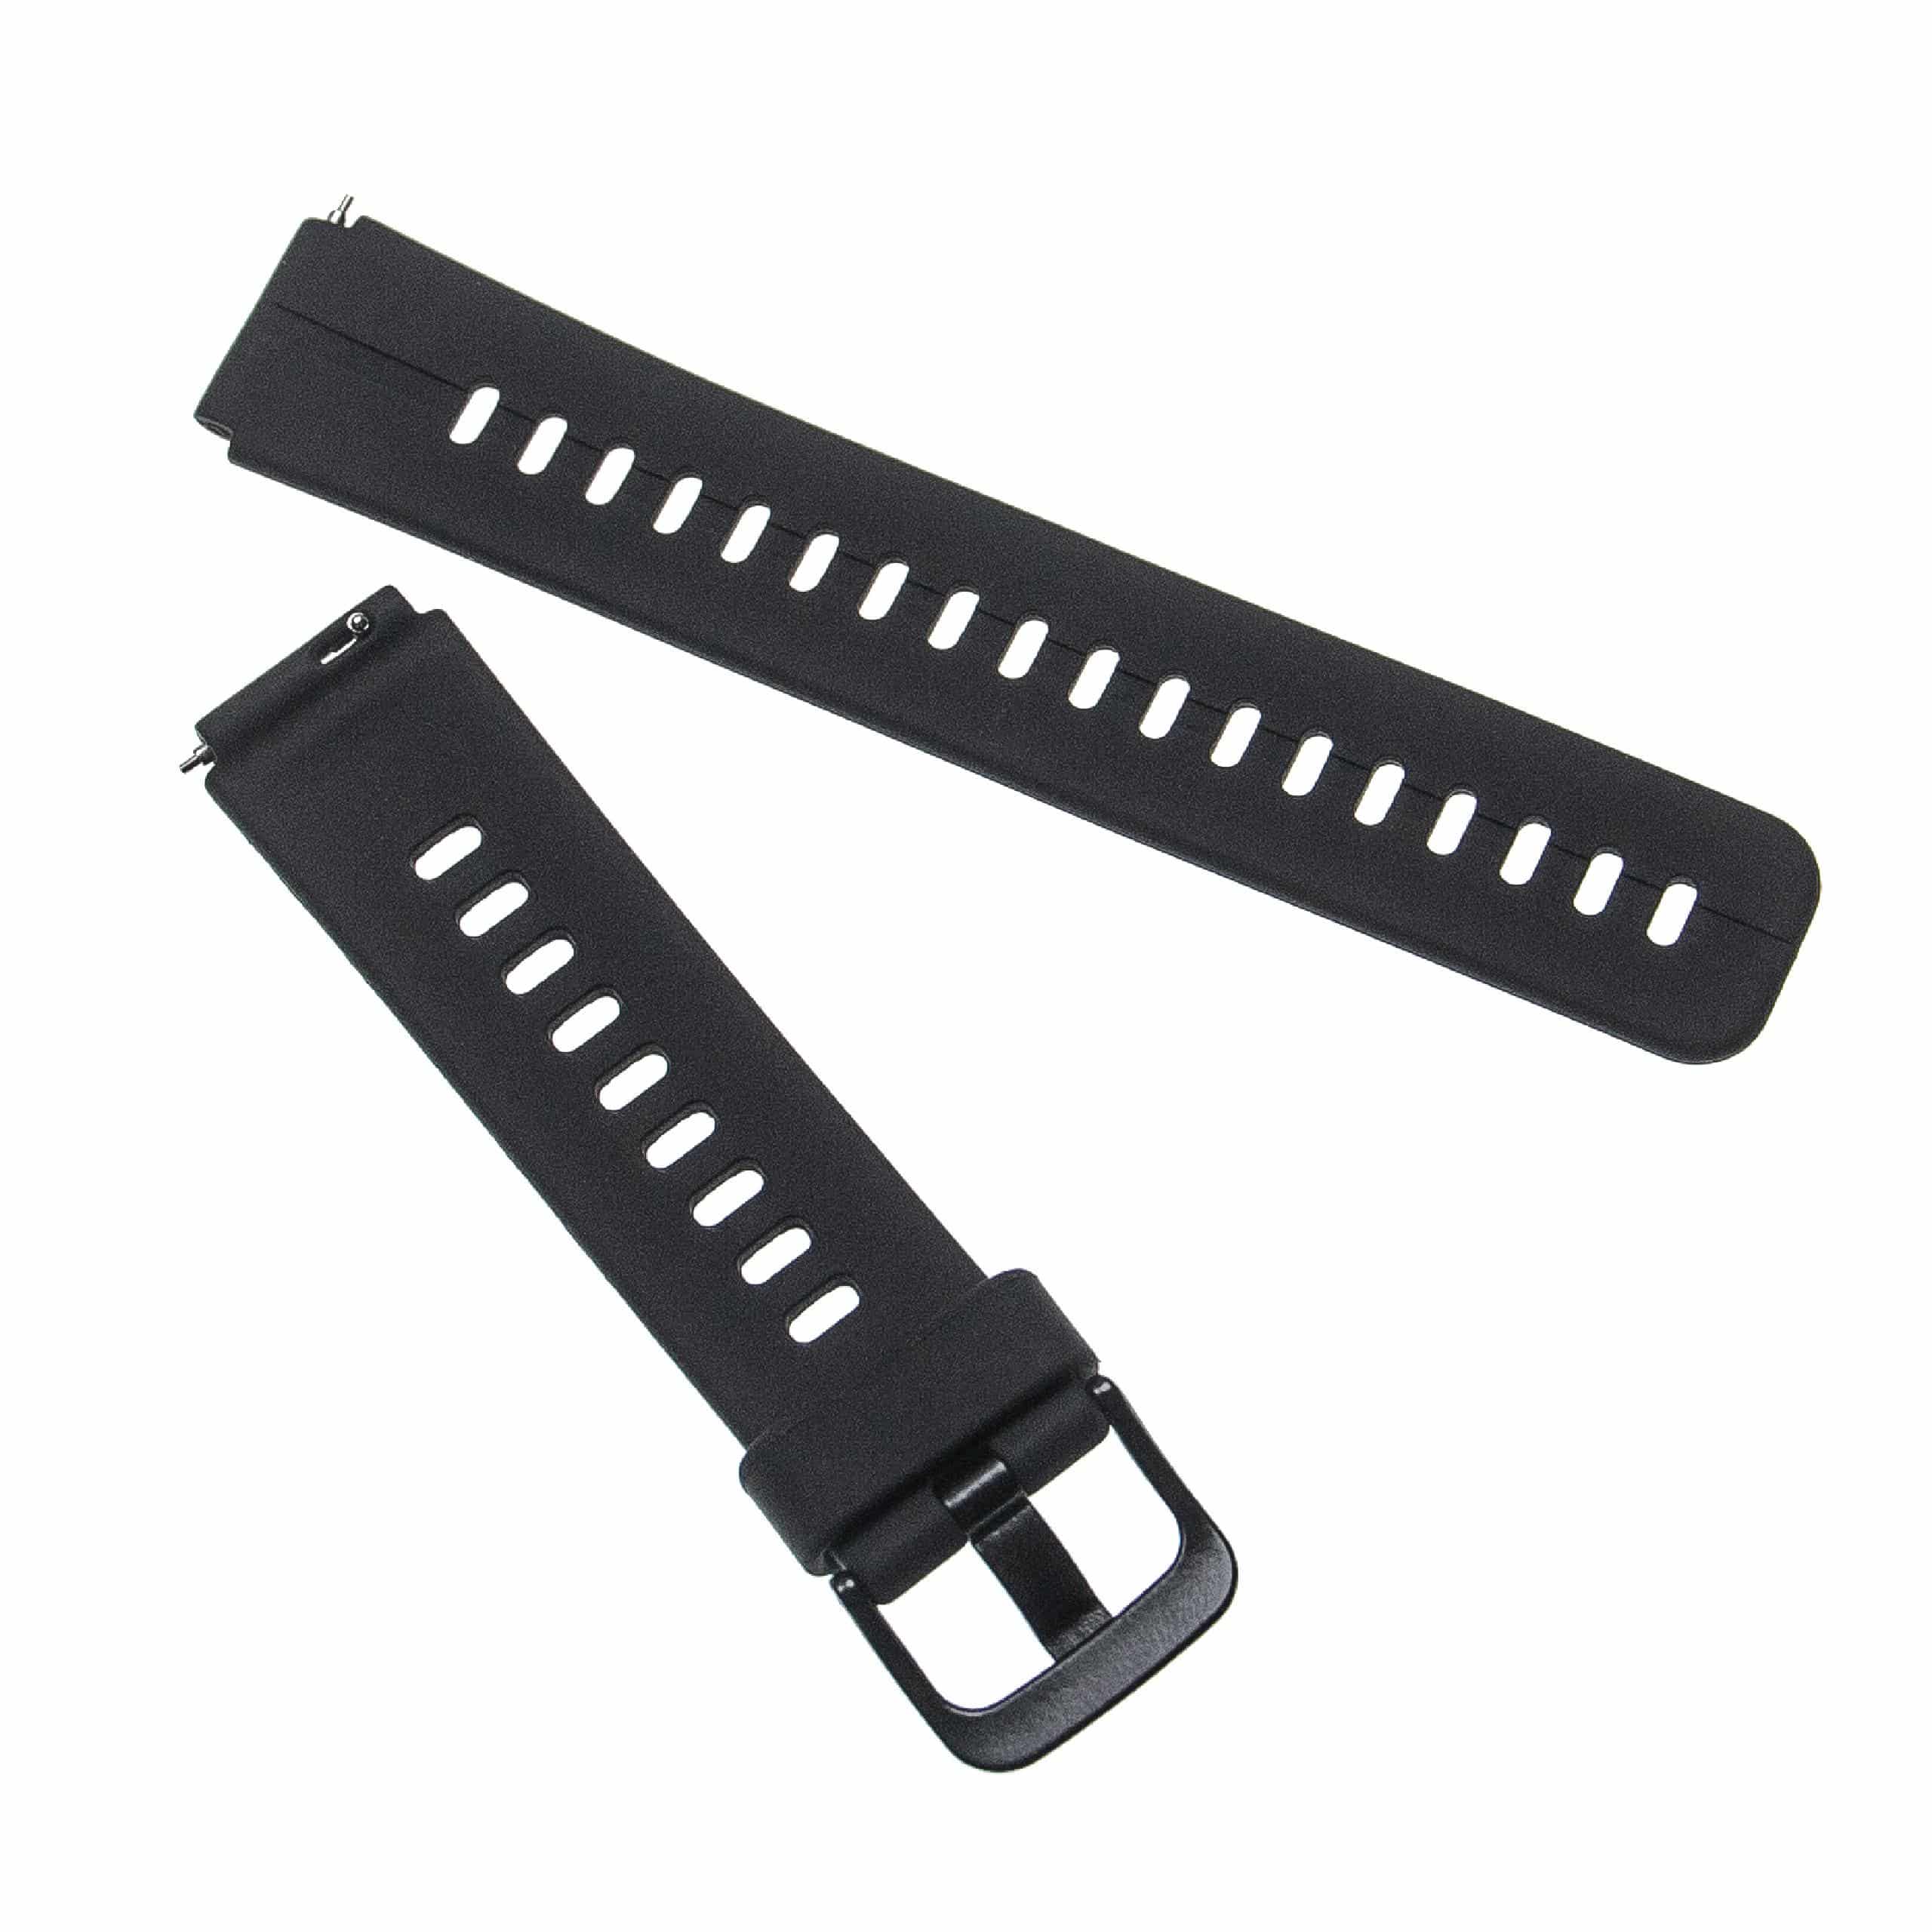 wristband for Huawei Smartwatch - 11.2 + 8.8 cm long, 16mm wide, silicone, black